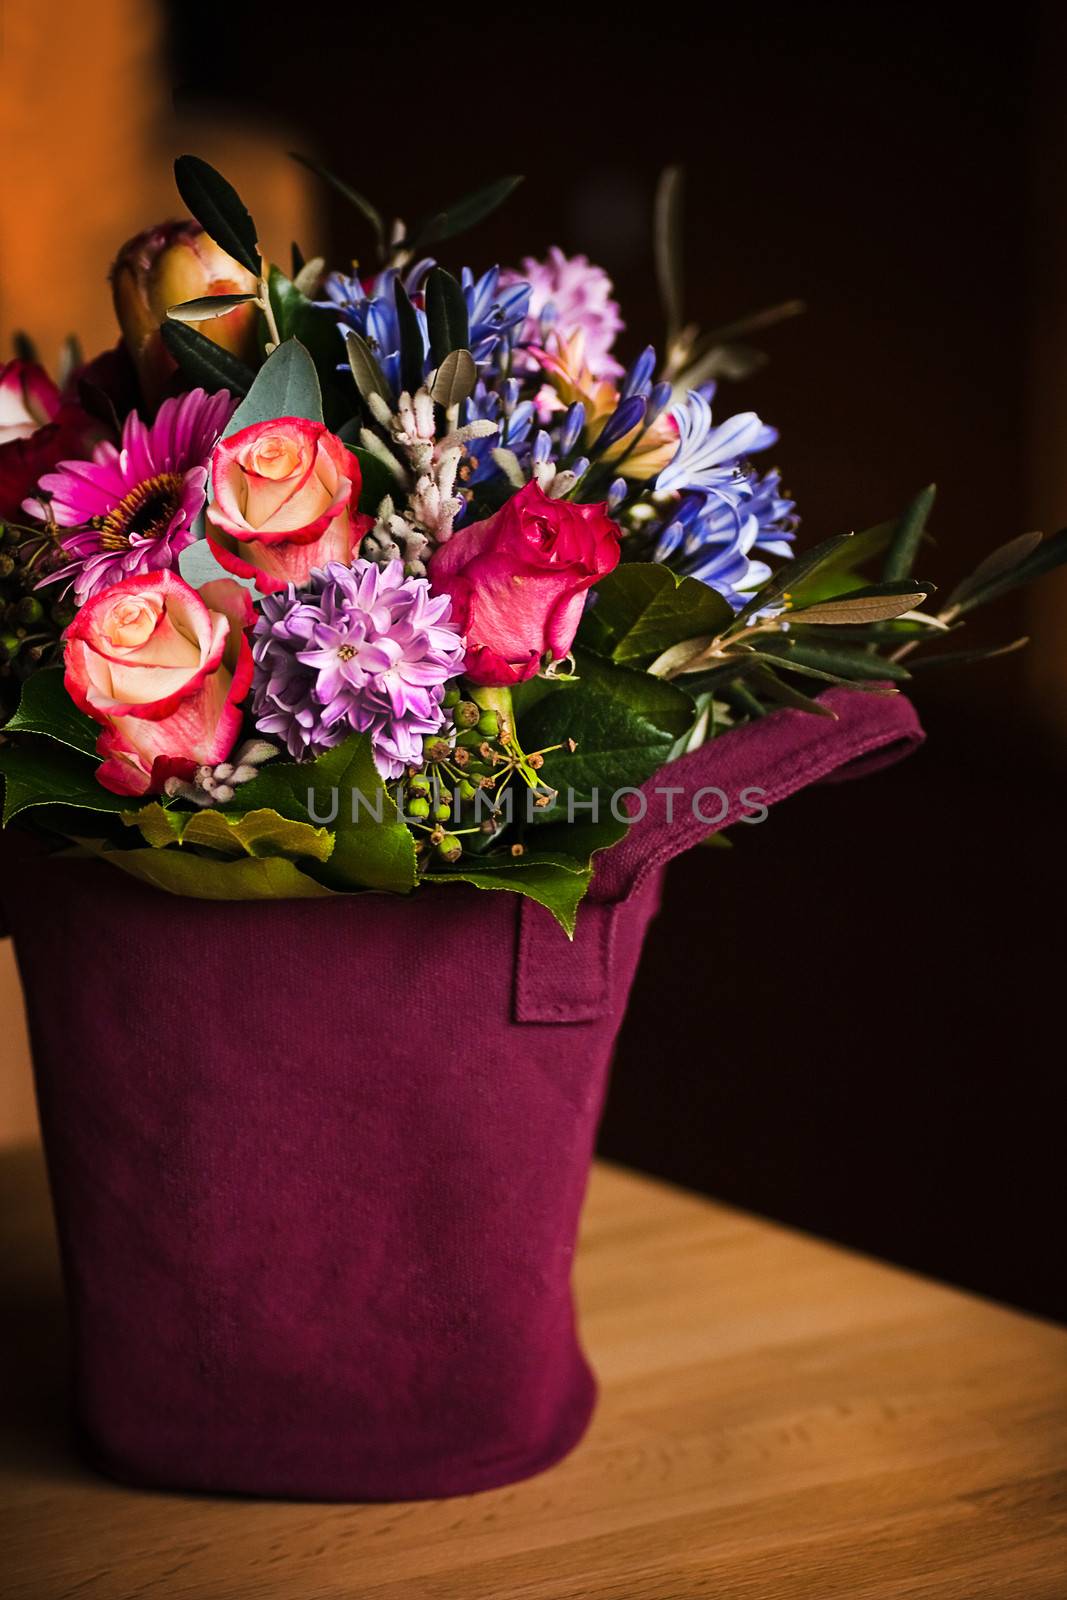 Vase like a shopping bag filled with spring flowers and with dark background on a table